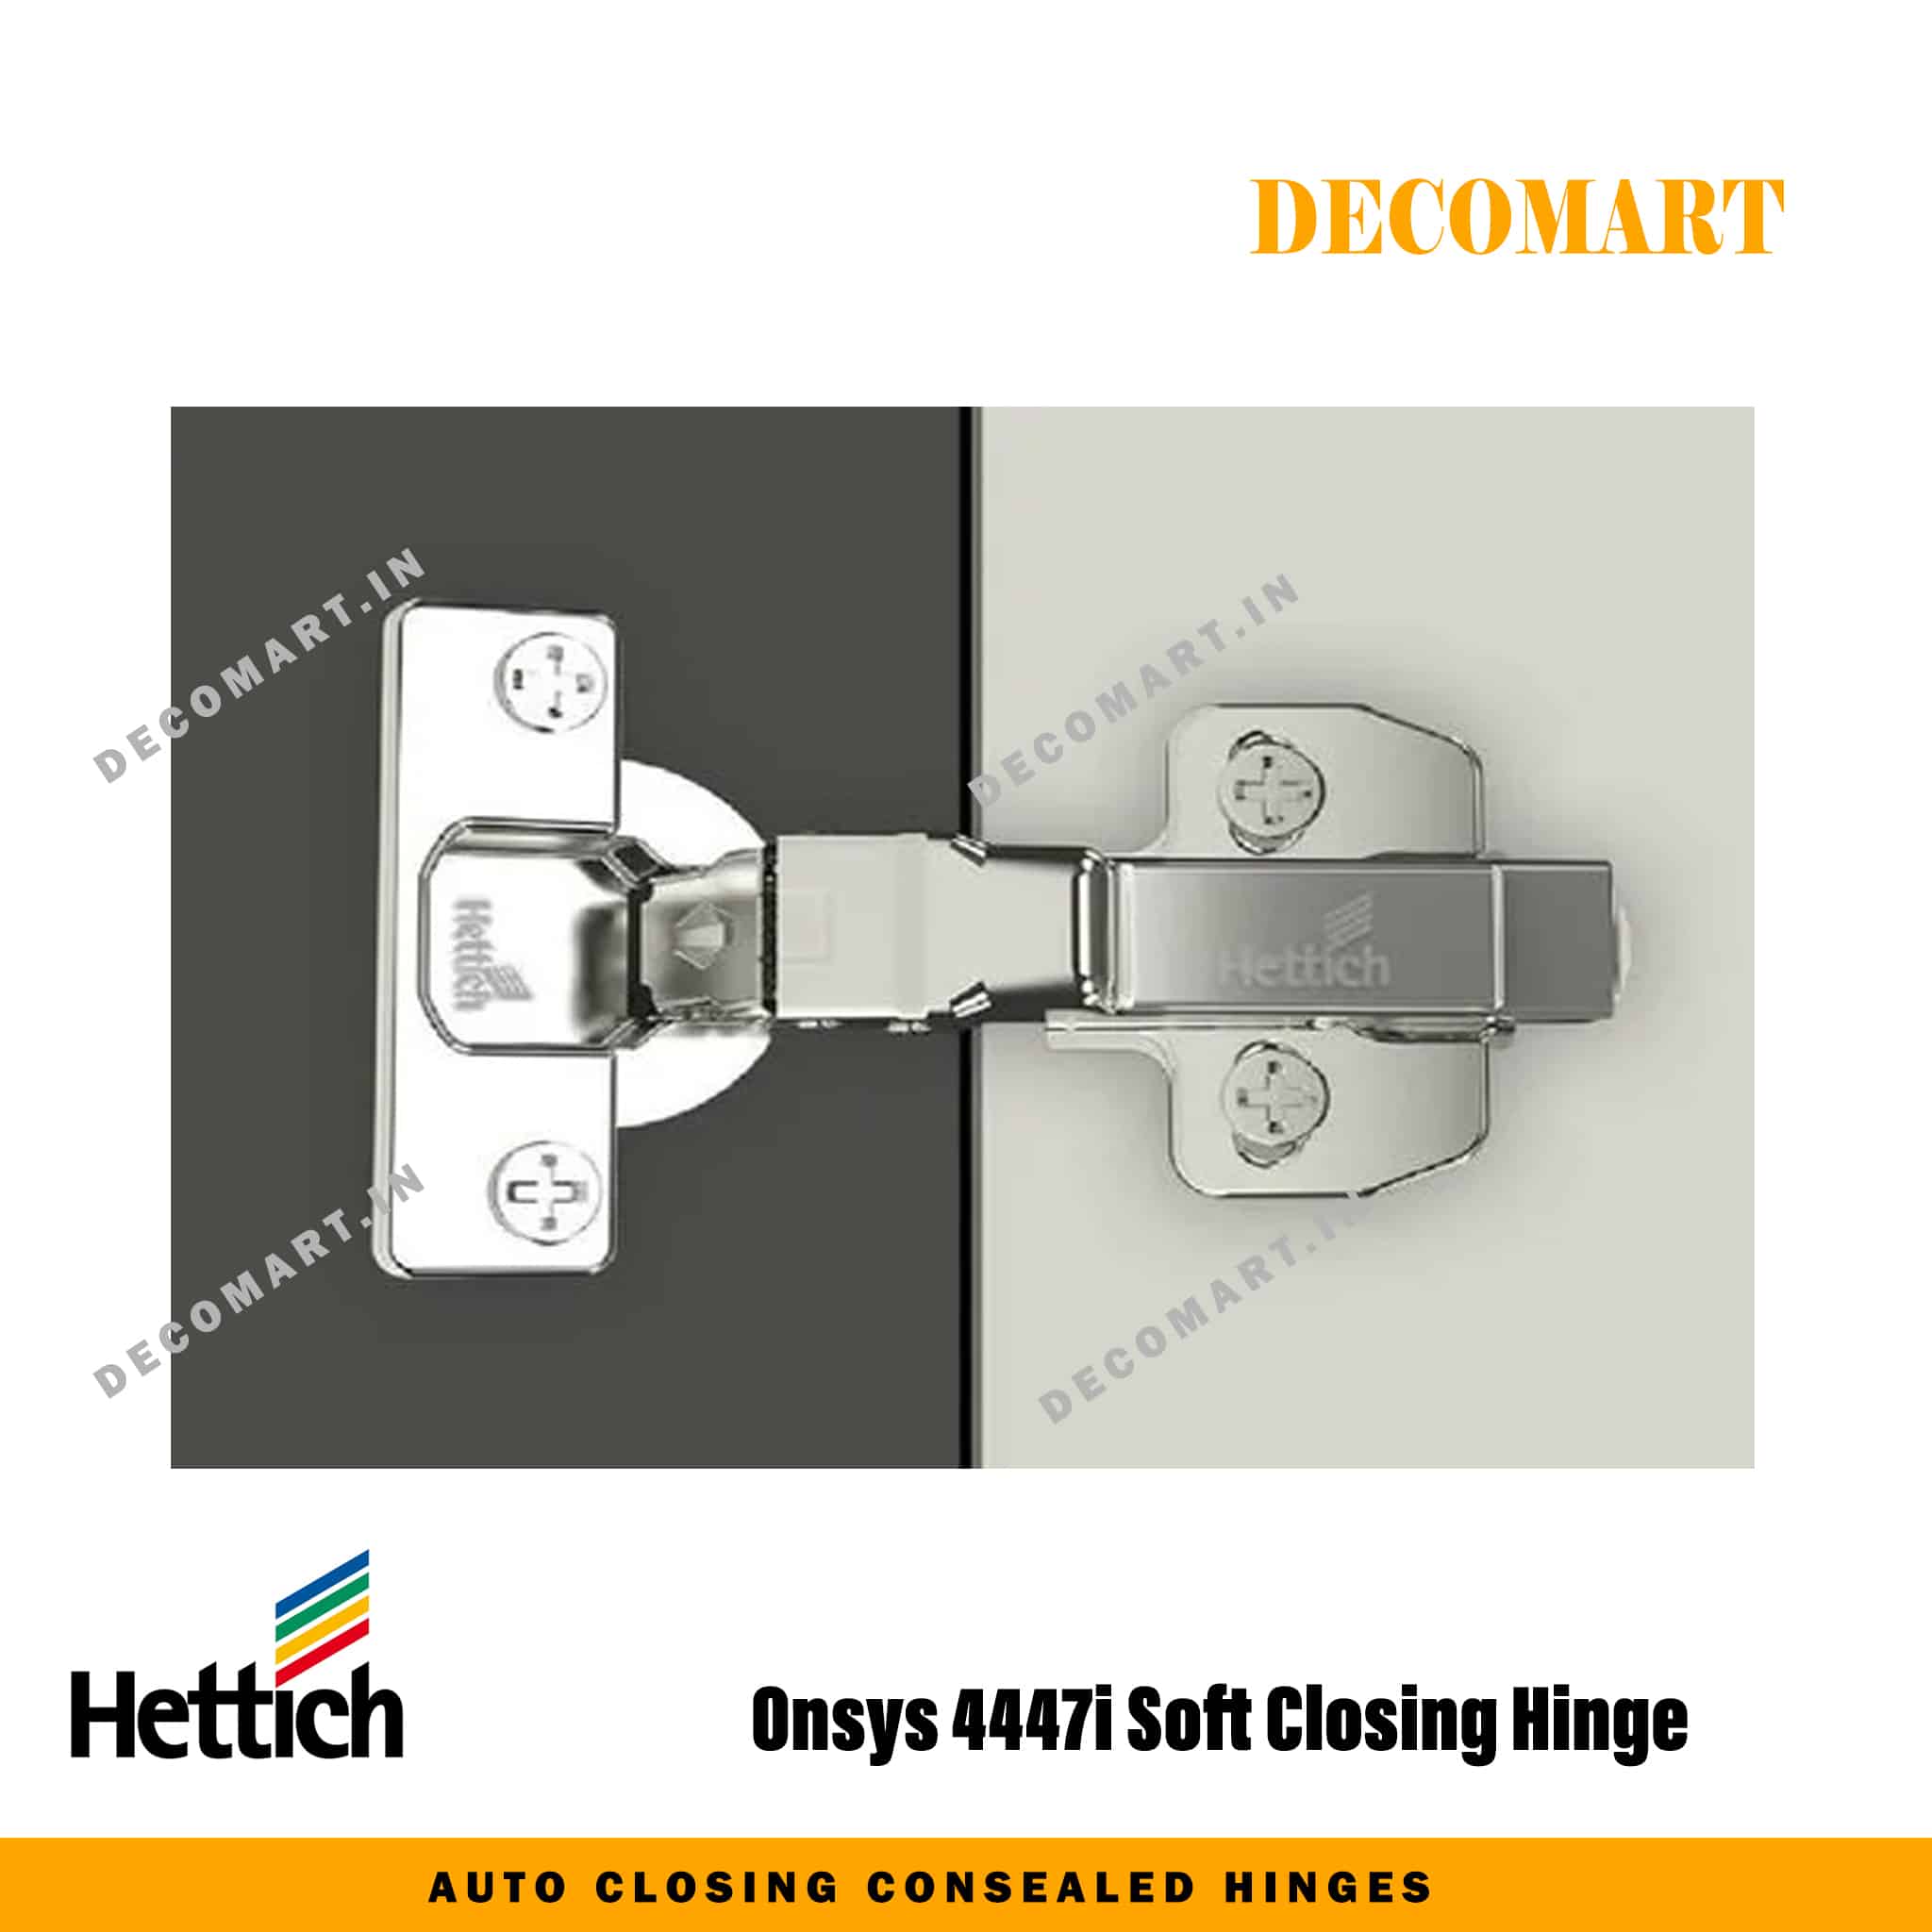 Hettich Onsys, Sensys, Veosys Softclose Hinges